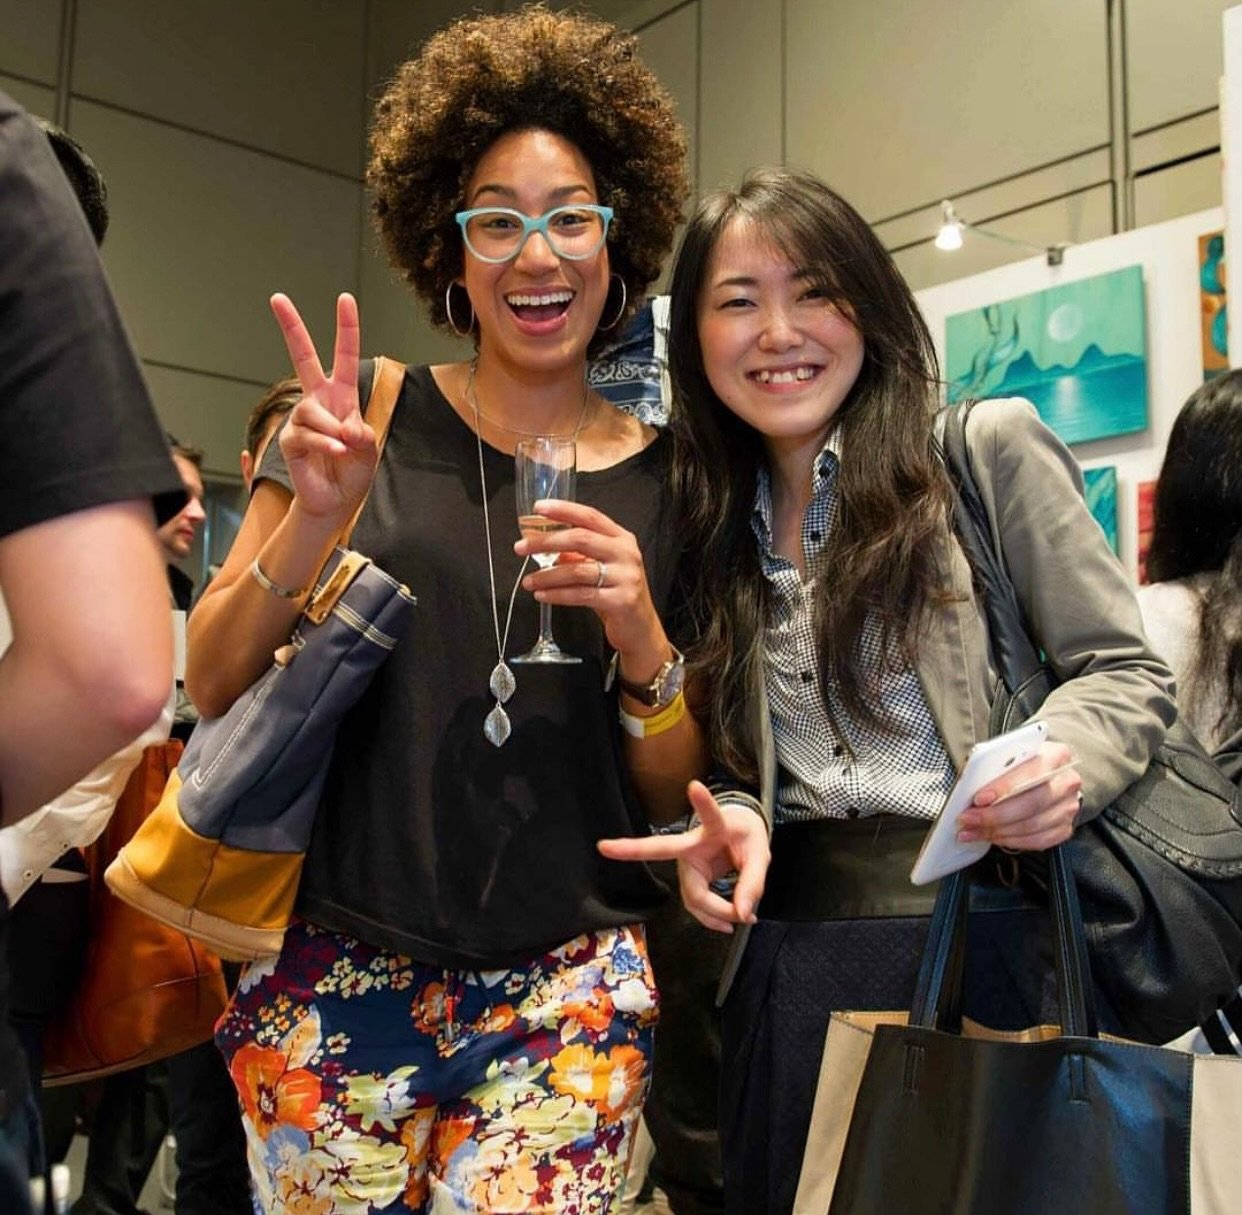 Happy vibes only! 😍🎌幸せな雰囲気だけ

The 7th edition of the Tokyo International Art Fair is gonna be the best ever. Lucky 7! 

Join us! 100 international exhibitors are selected to exhibit and sell at the grand 7th edition of TIAF! 

Expect true talent, n